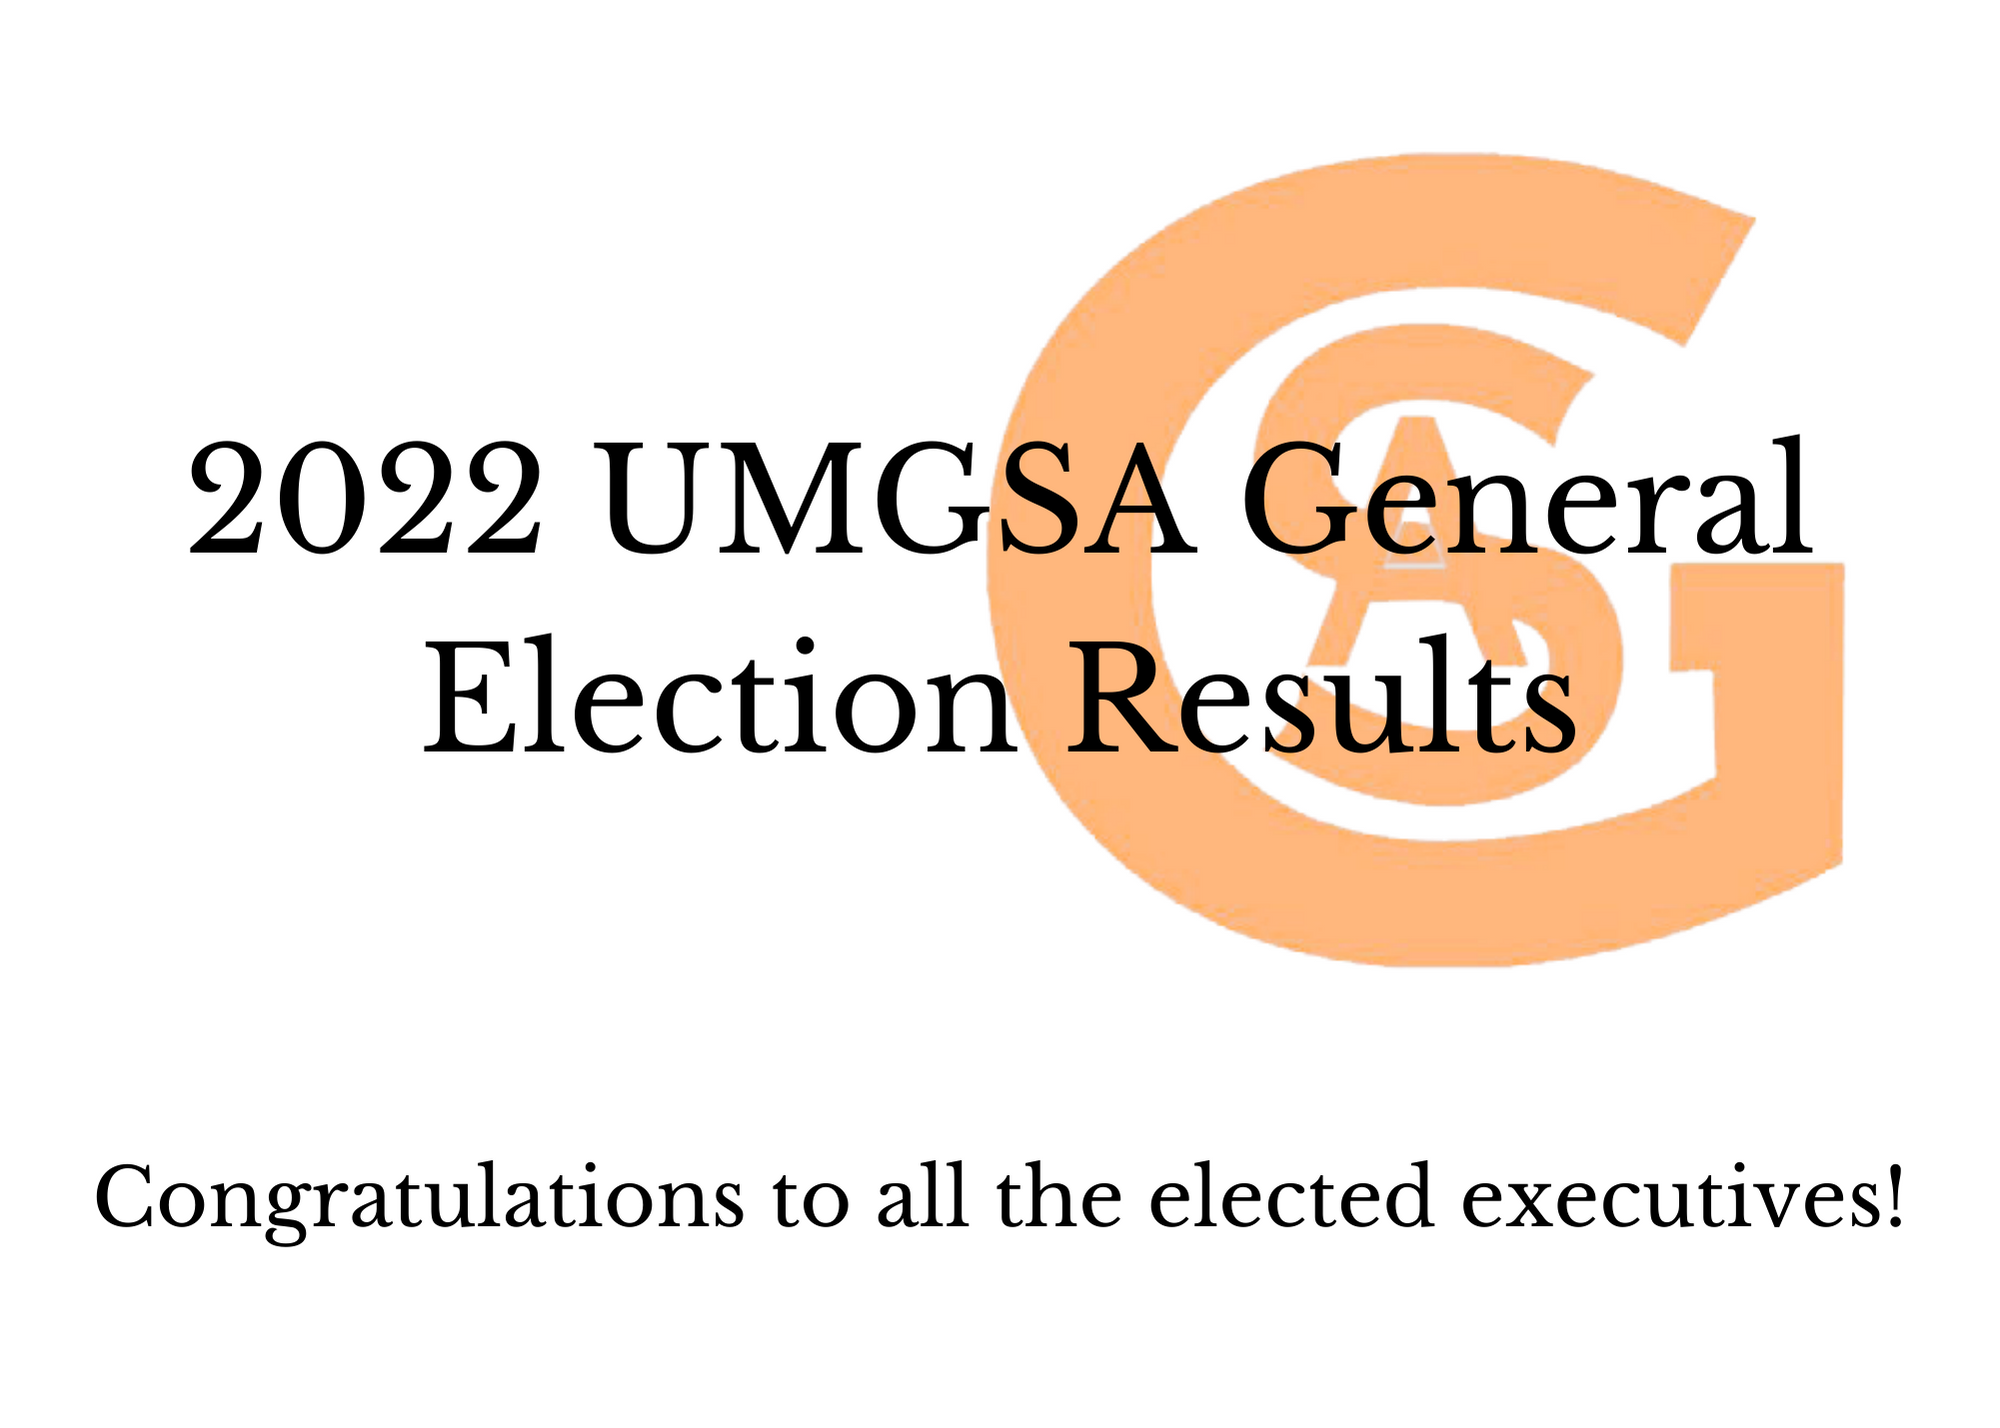 UMGSA General Election Results 2022